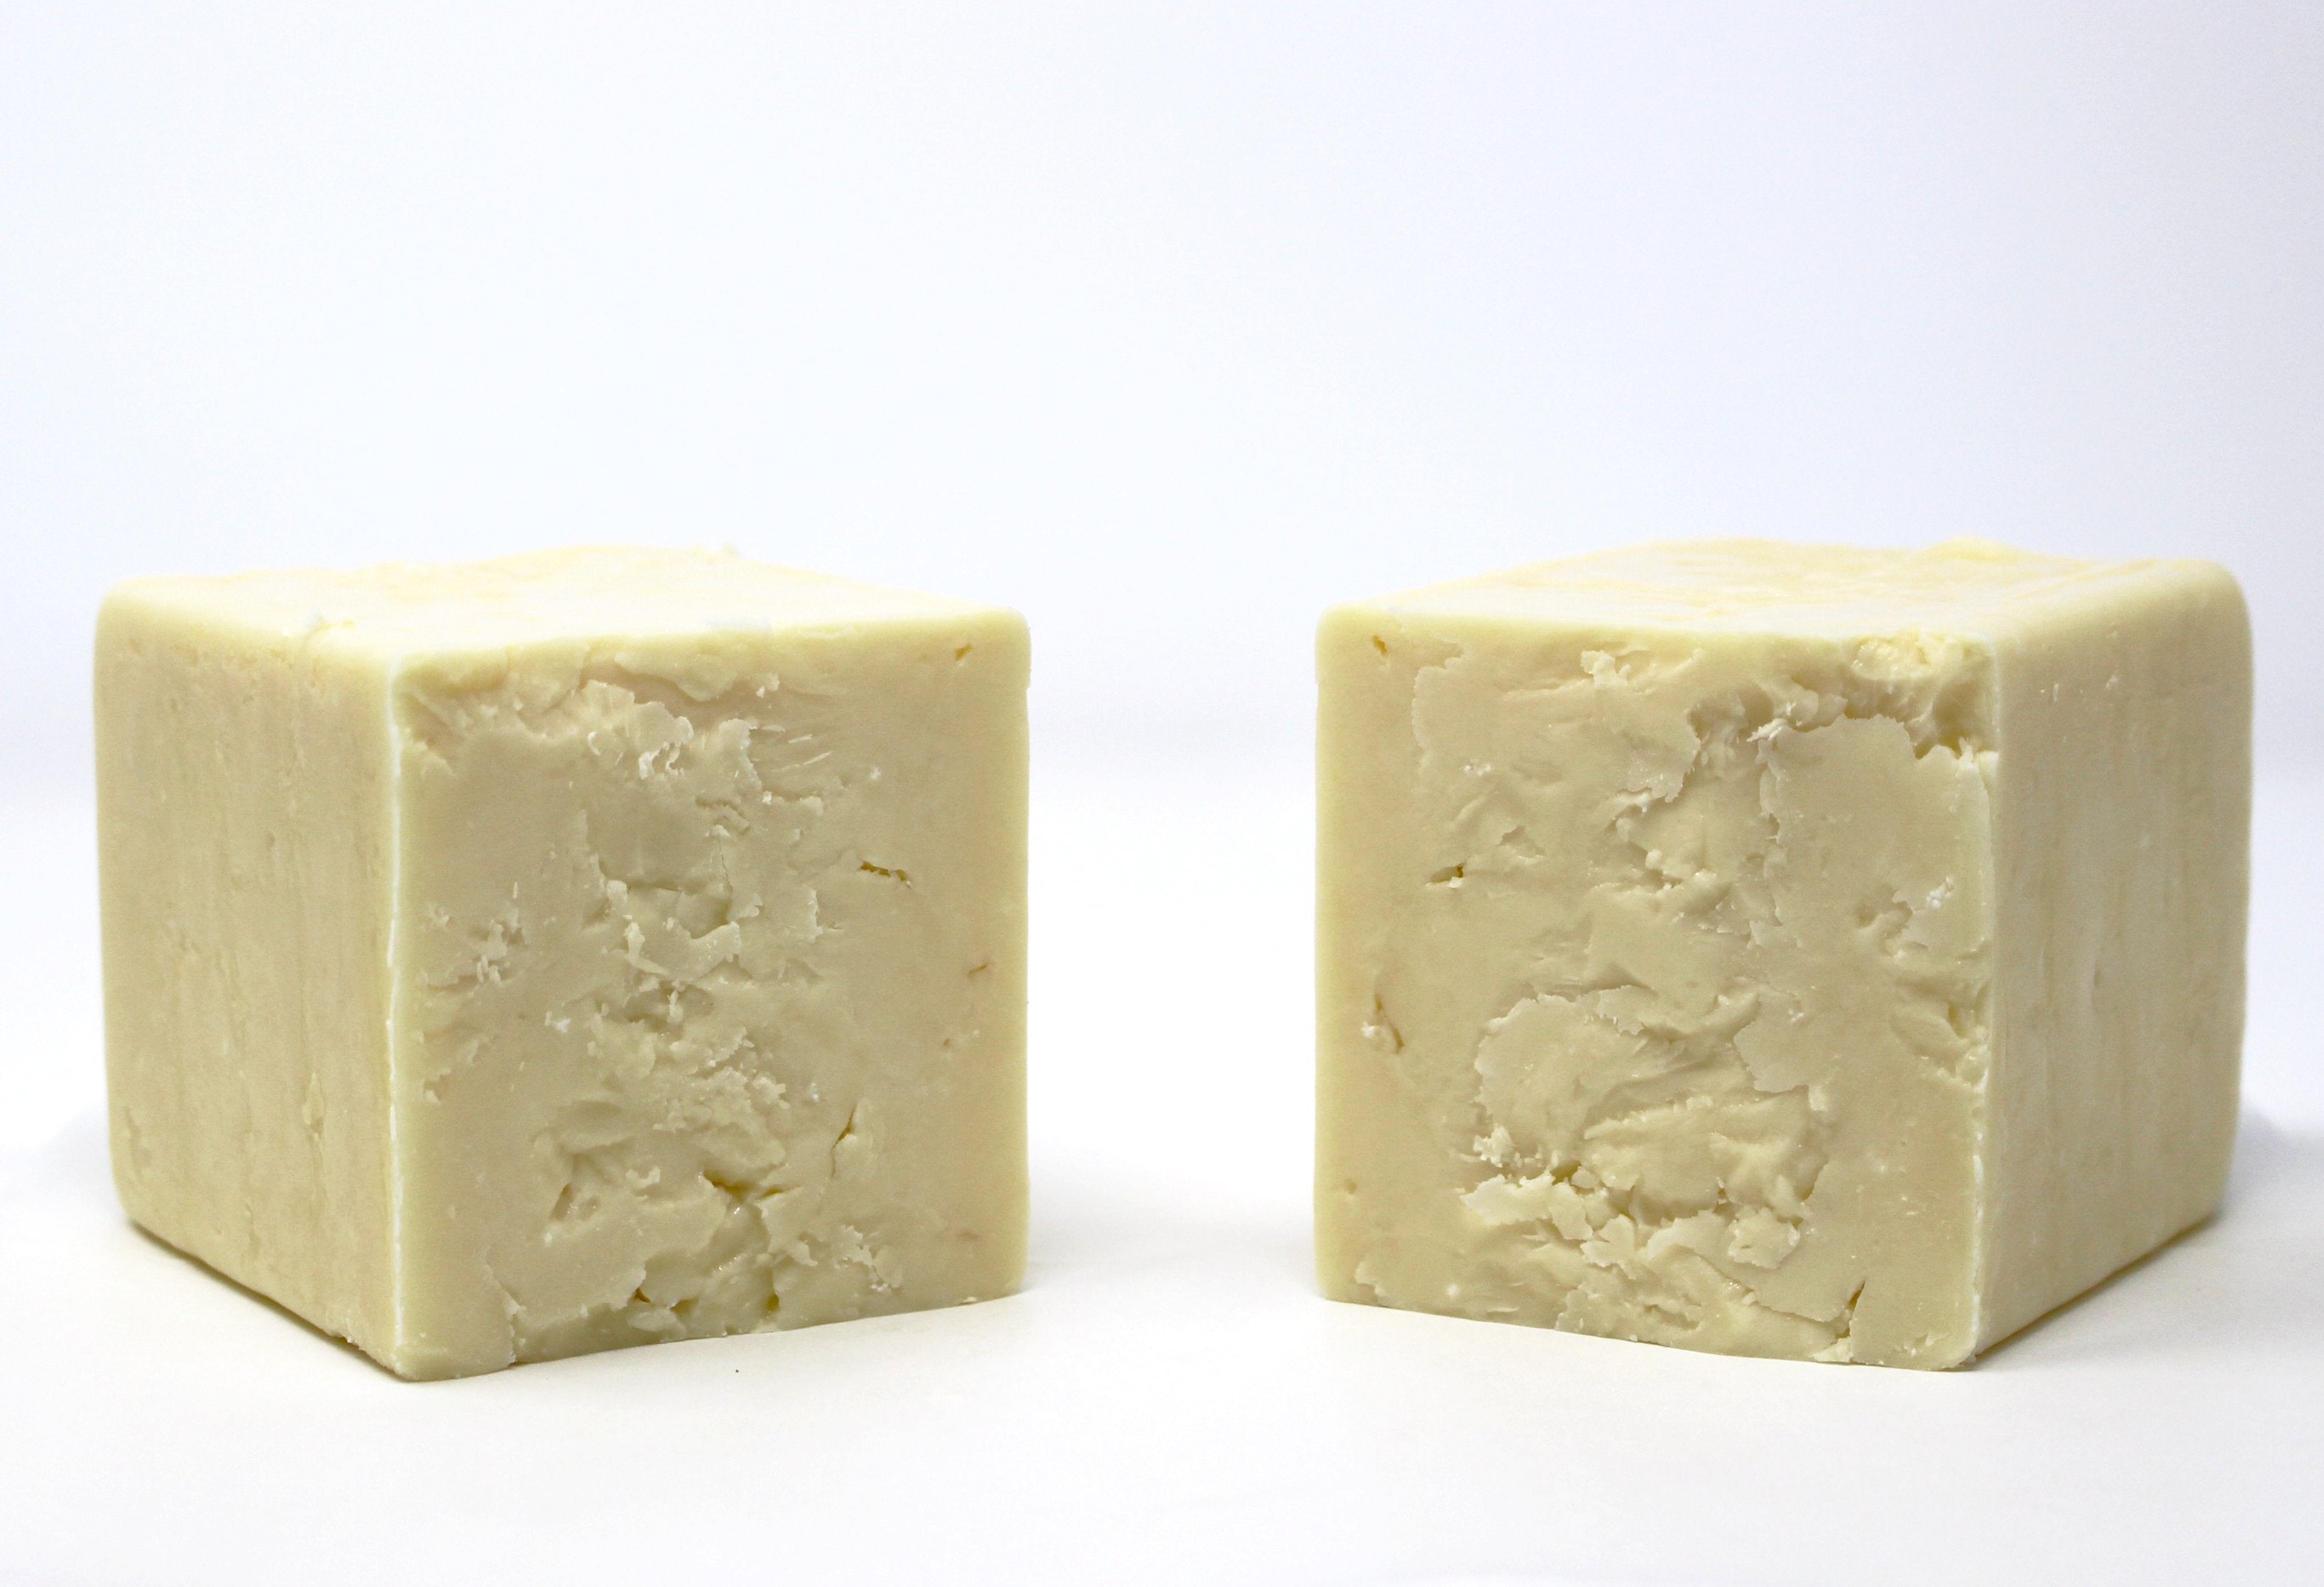 Cabot 2 year vintage Cheddar - Cured and Cultivated